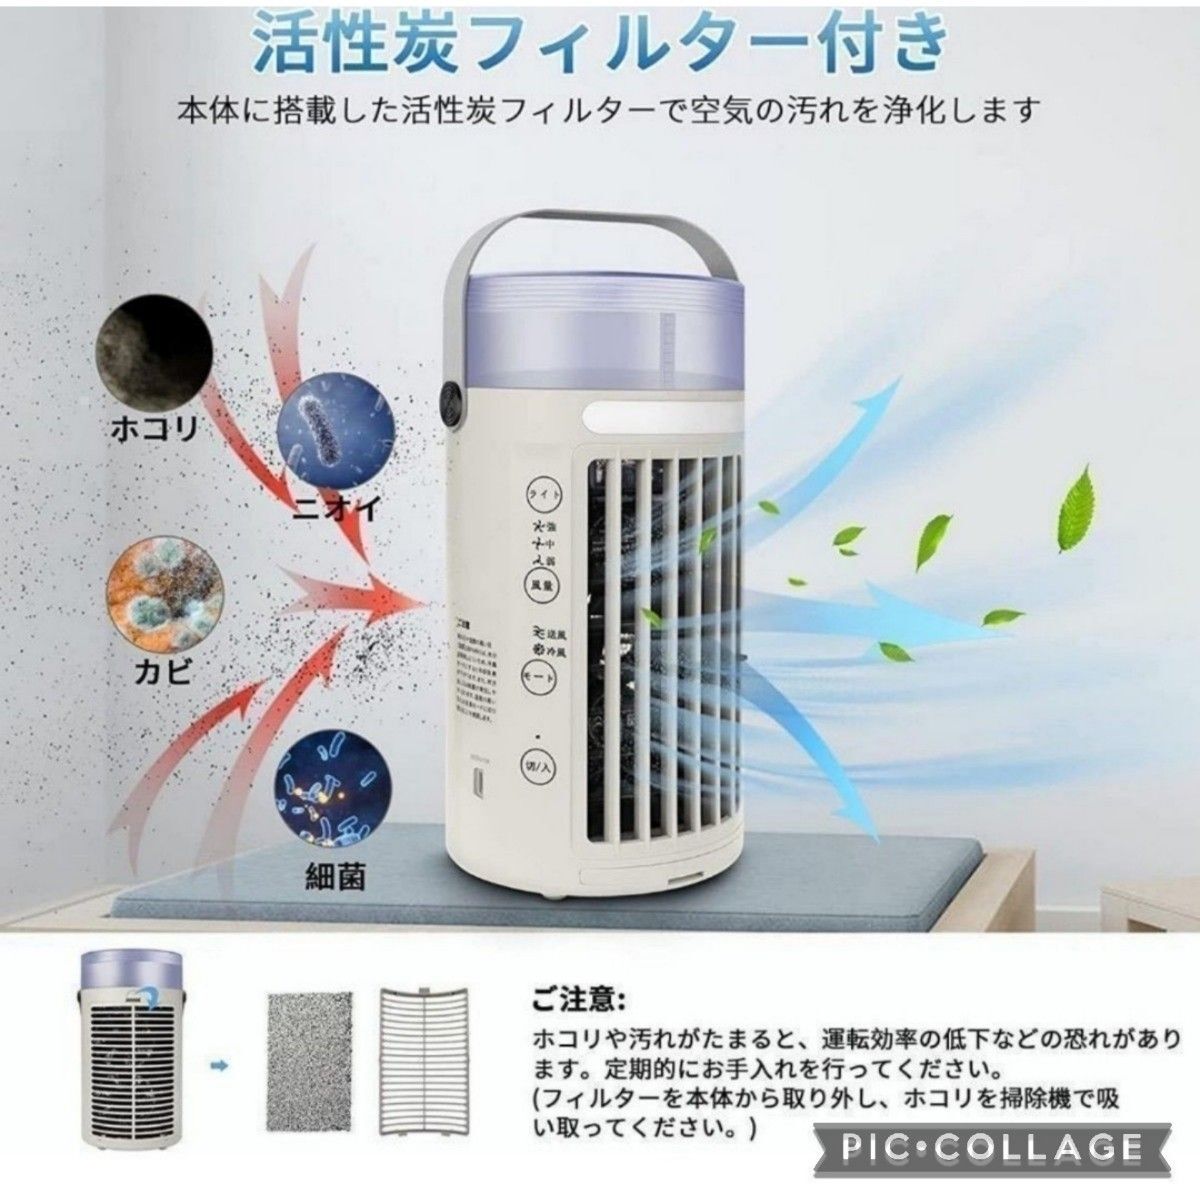 . hot,. middle . measures! new goods free shipping! cold air fan desk cold manner machine Mini air conditioner USB supply of electricity type cold manner electric fan desk electric fan spot cooler small size 